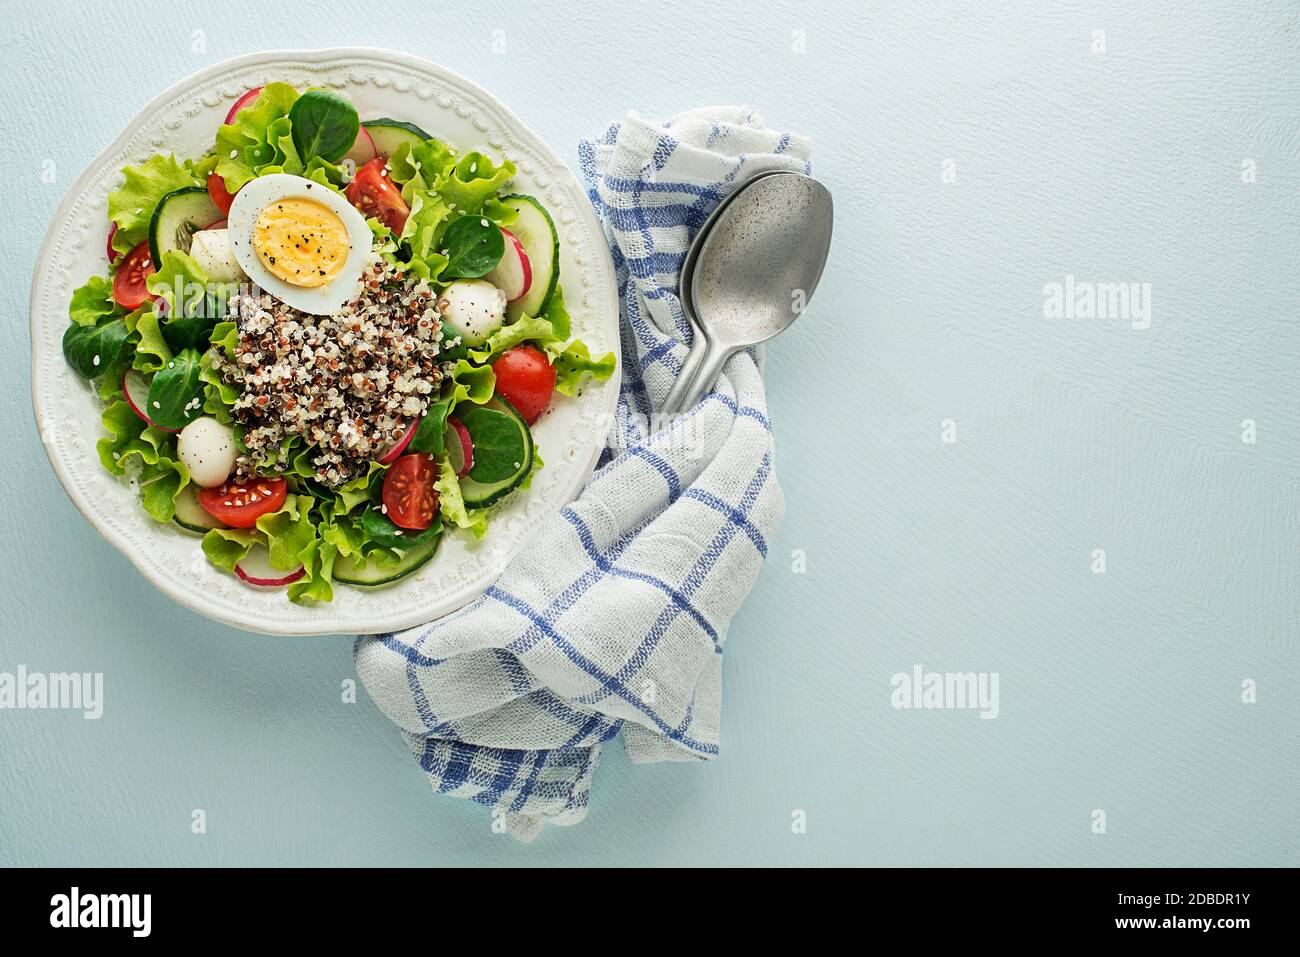 Healthy Green salad meal with quinoa seeds, egg and fresh vegetables on blue table background Stock Photo